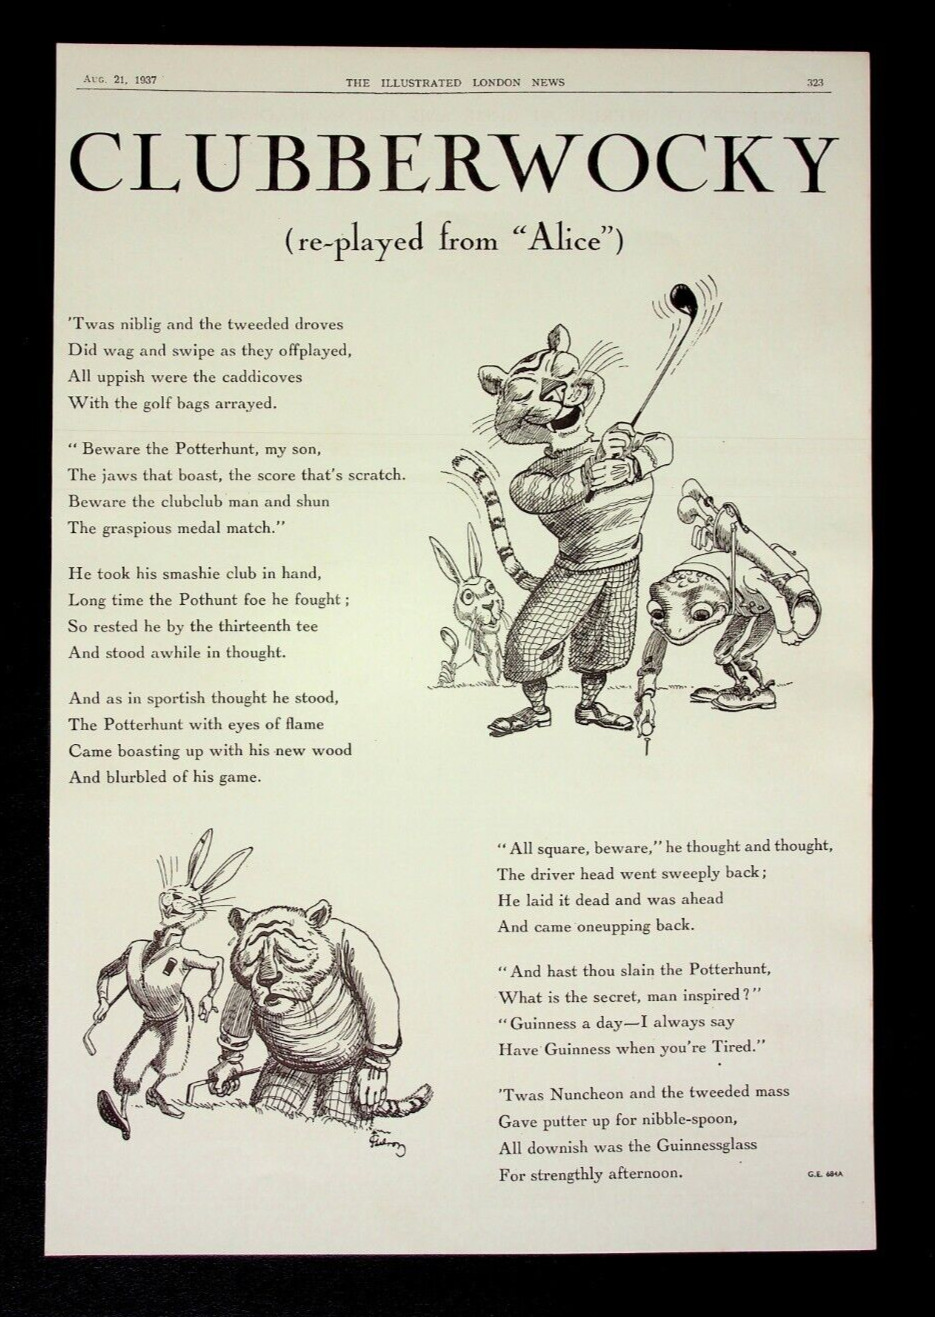 1937 Print Ad, Guinness Golf Advert, Clubberwocky, Re-played from Alice, Poem